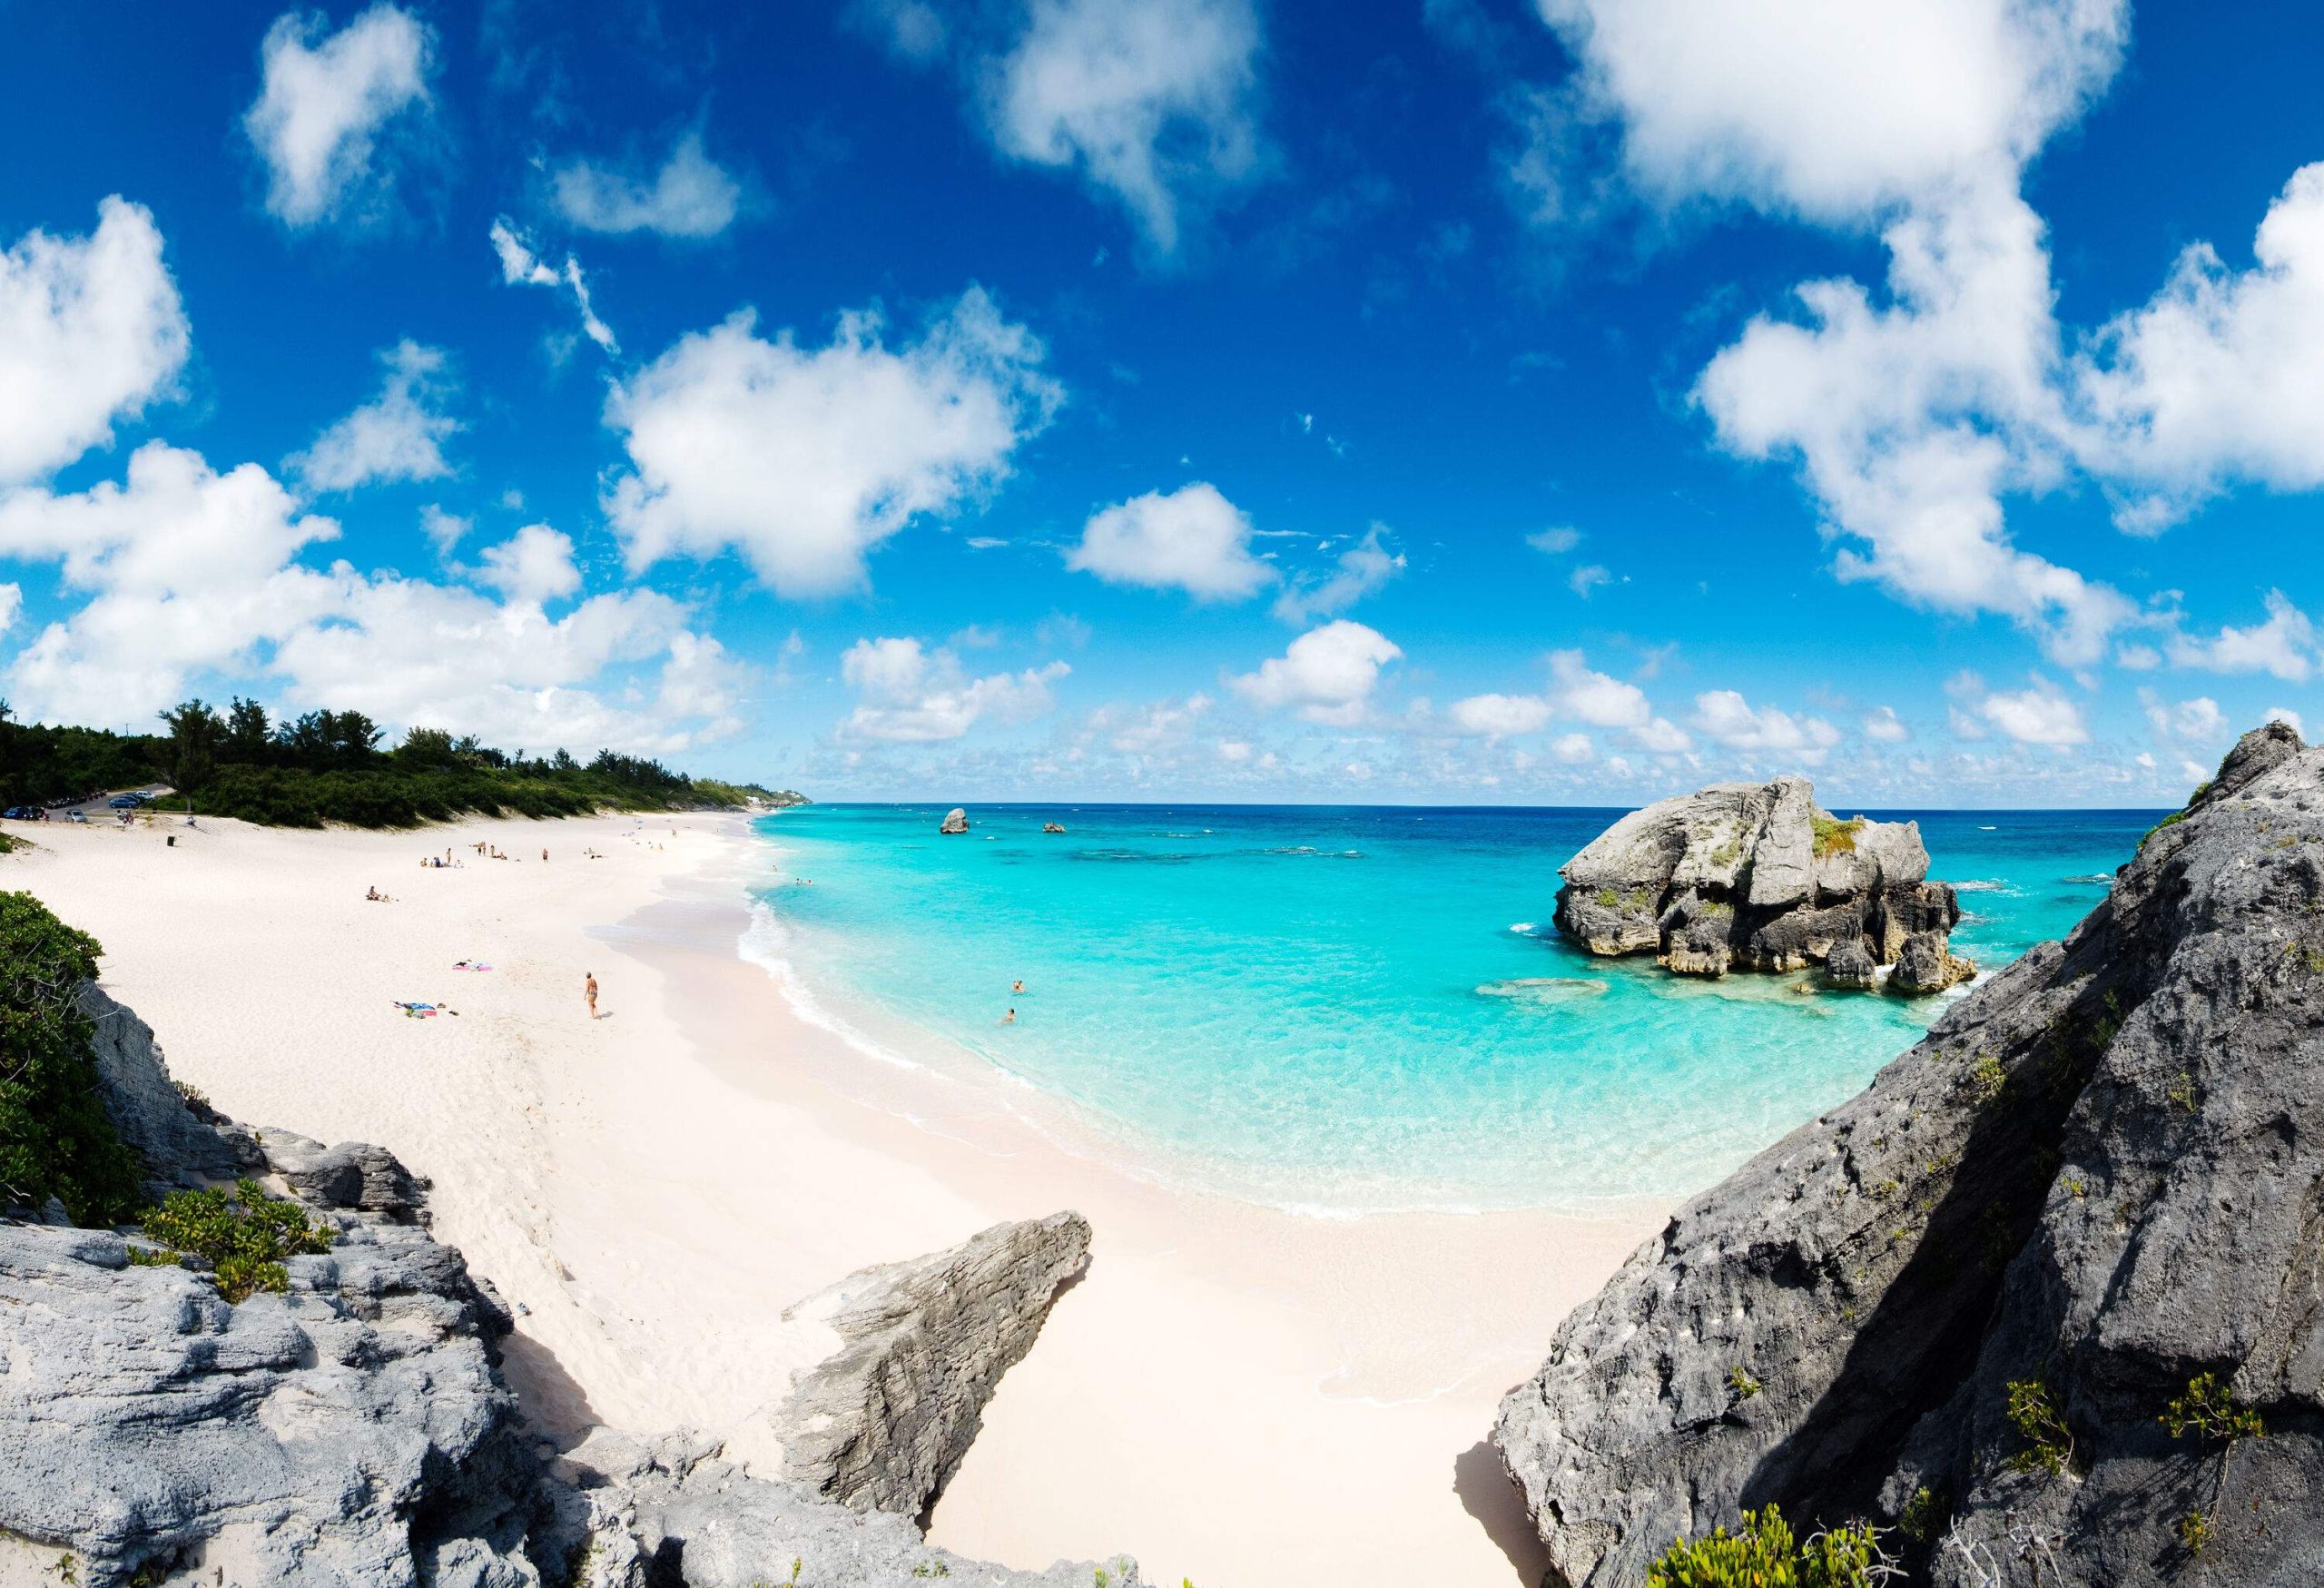 A pristine sandy beach with turquoise seas beneath a deep blue daytime sky with patches of white clouds.